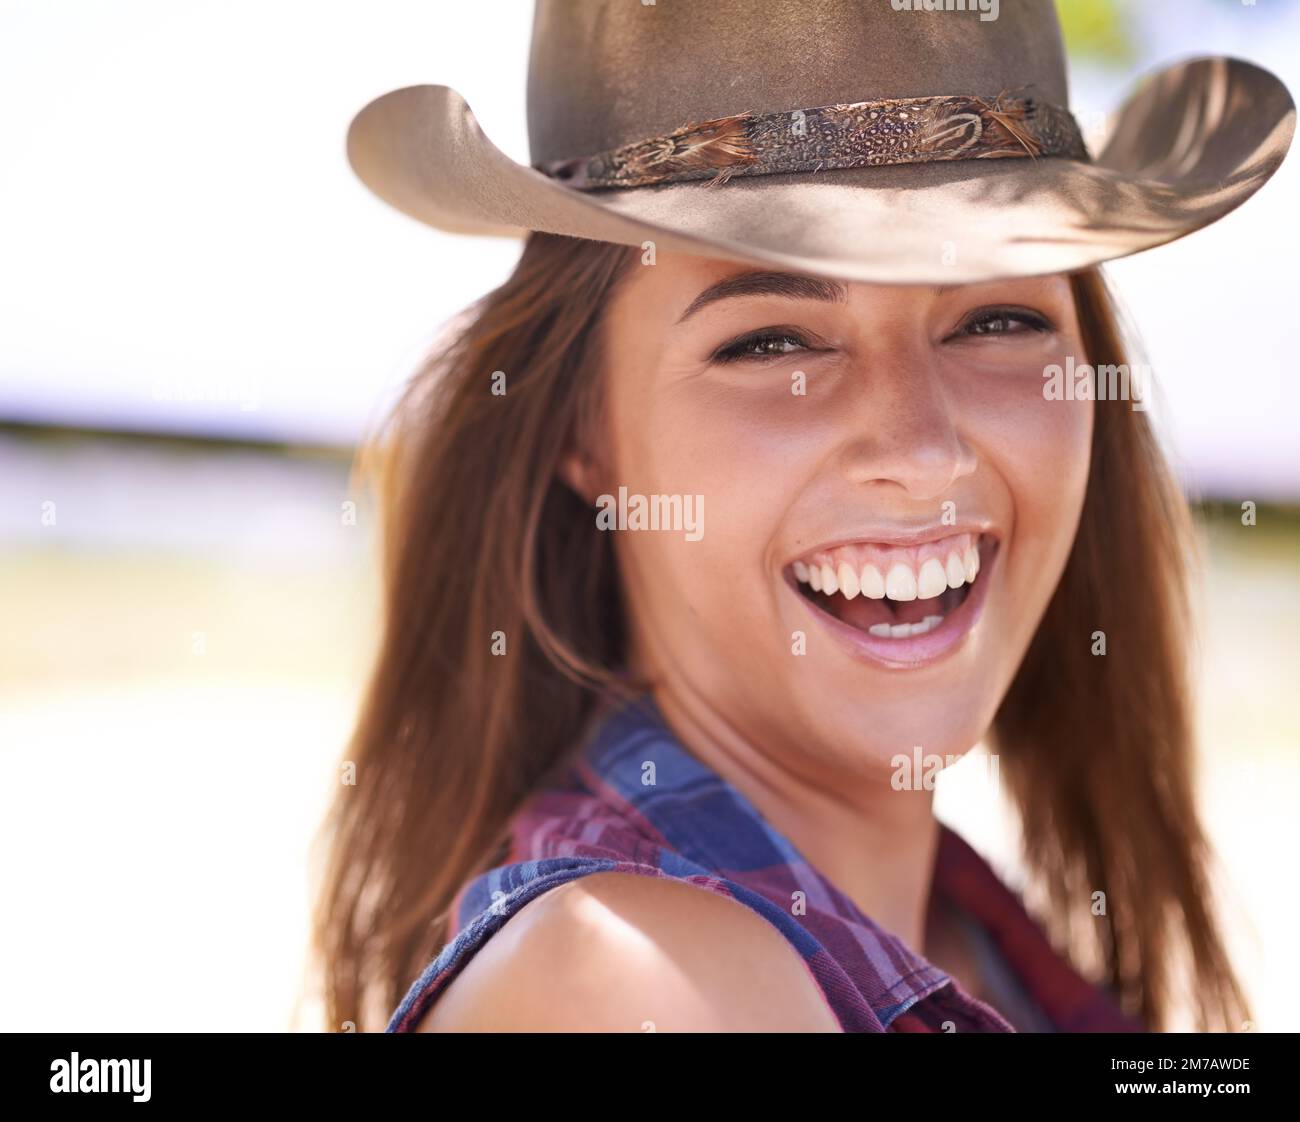 Do it right or get off the horse. A beautiful cowgirl standing outdoors. Stock Photo